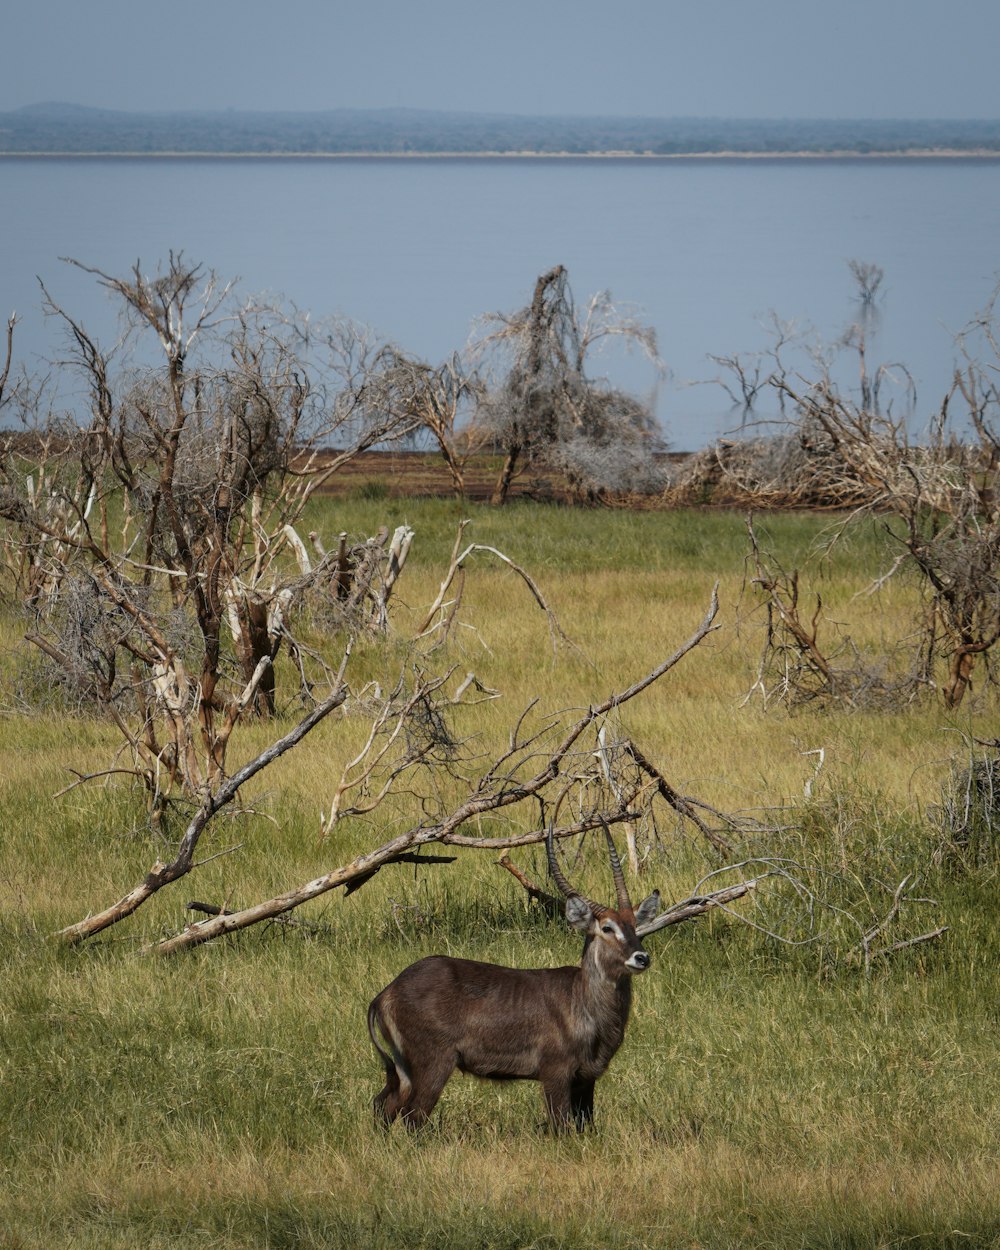 a deer standing in a field next to a body of water